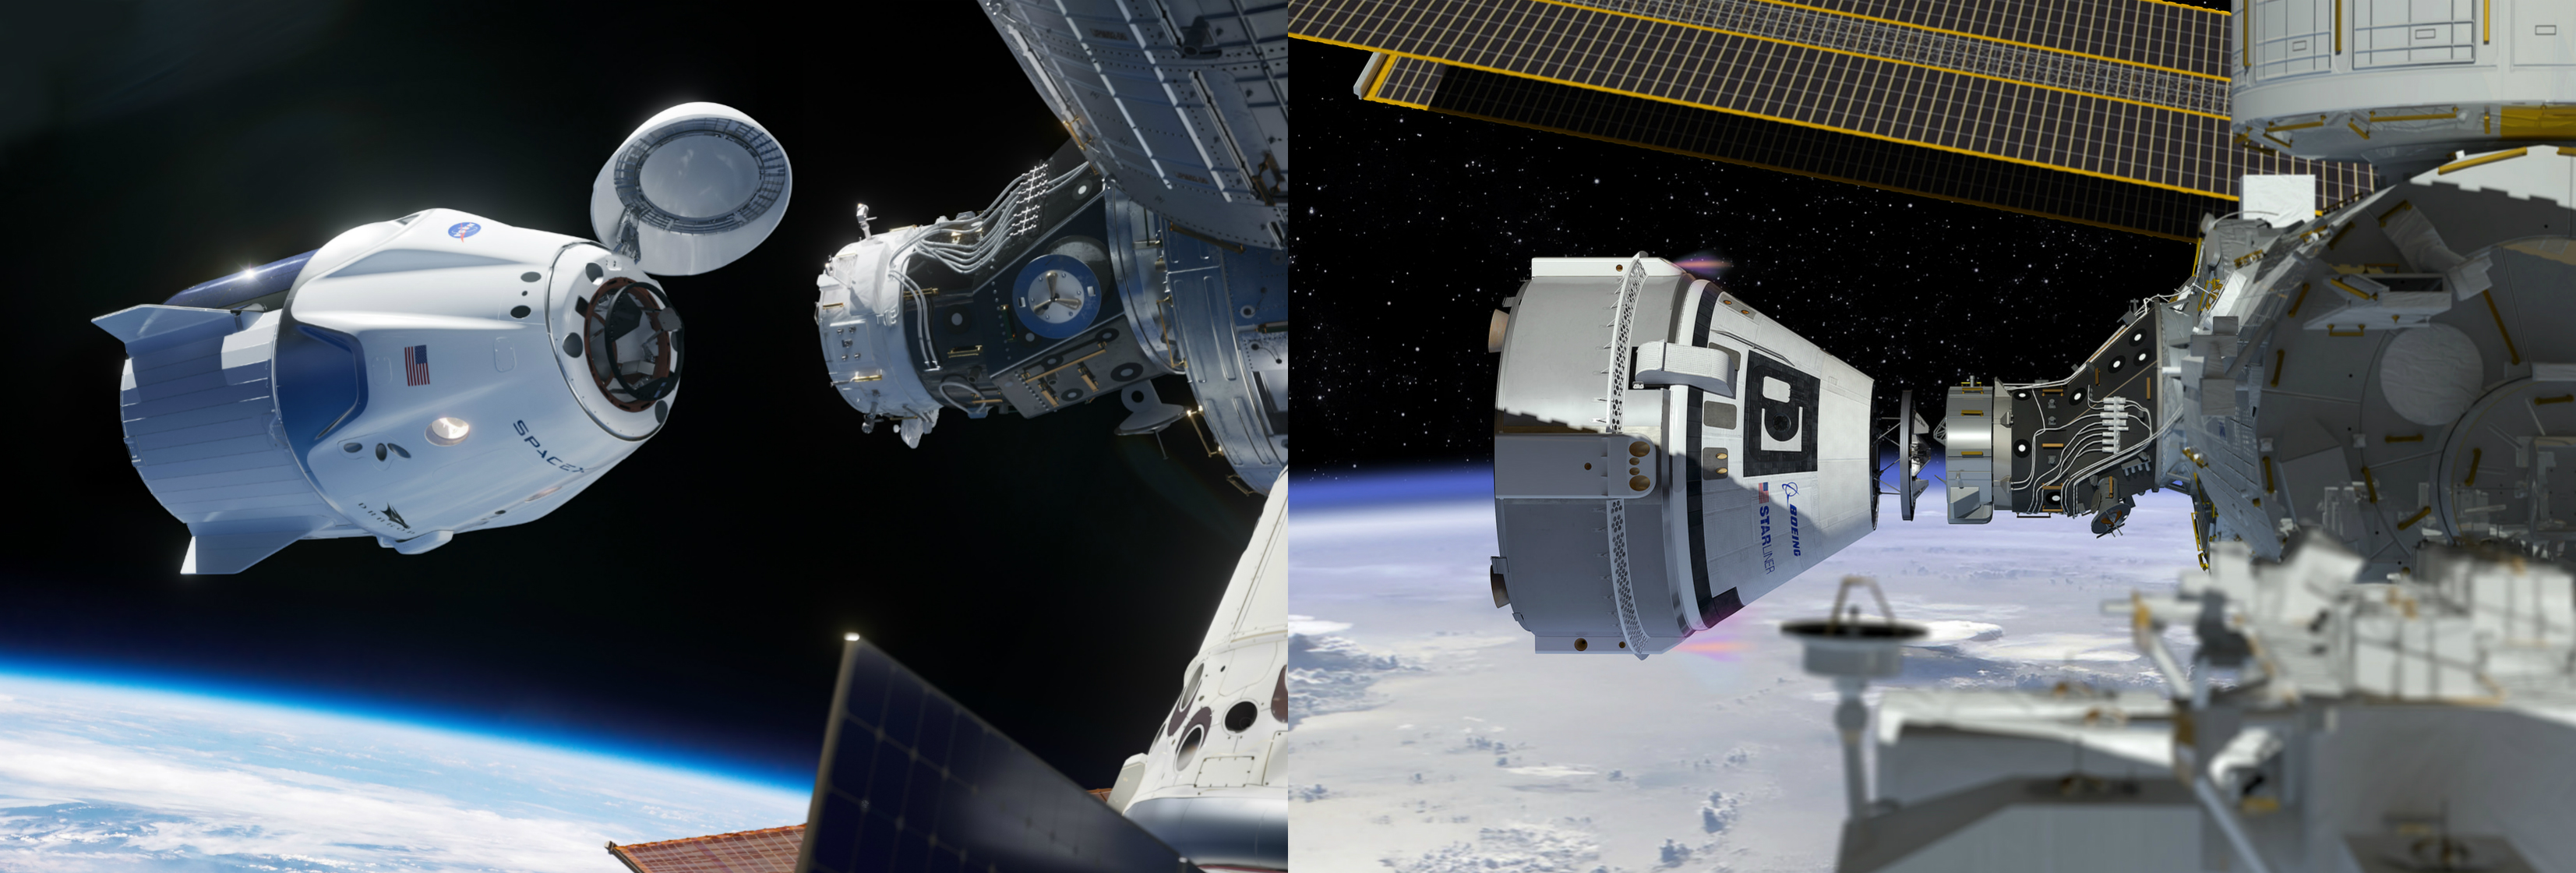 SpaceX Crew Dragon and Boeing CST-100 Starliner